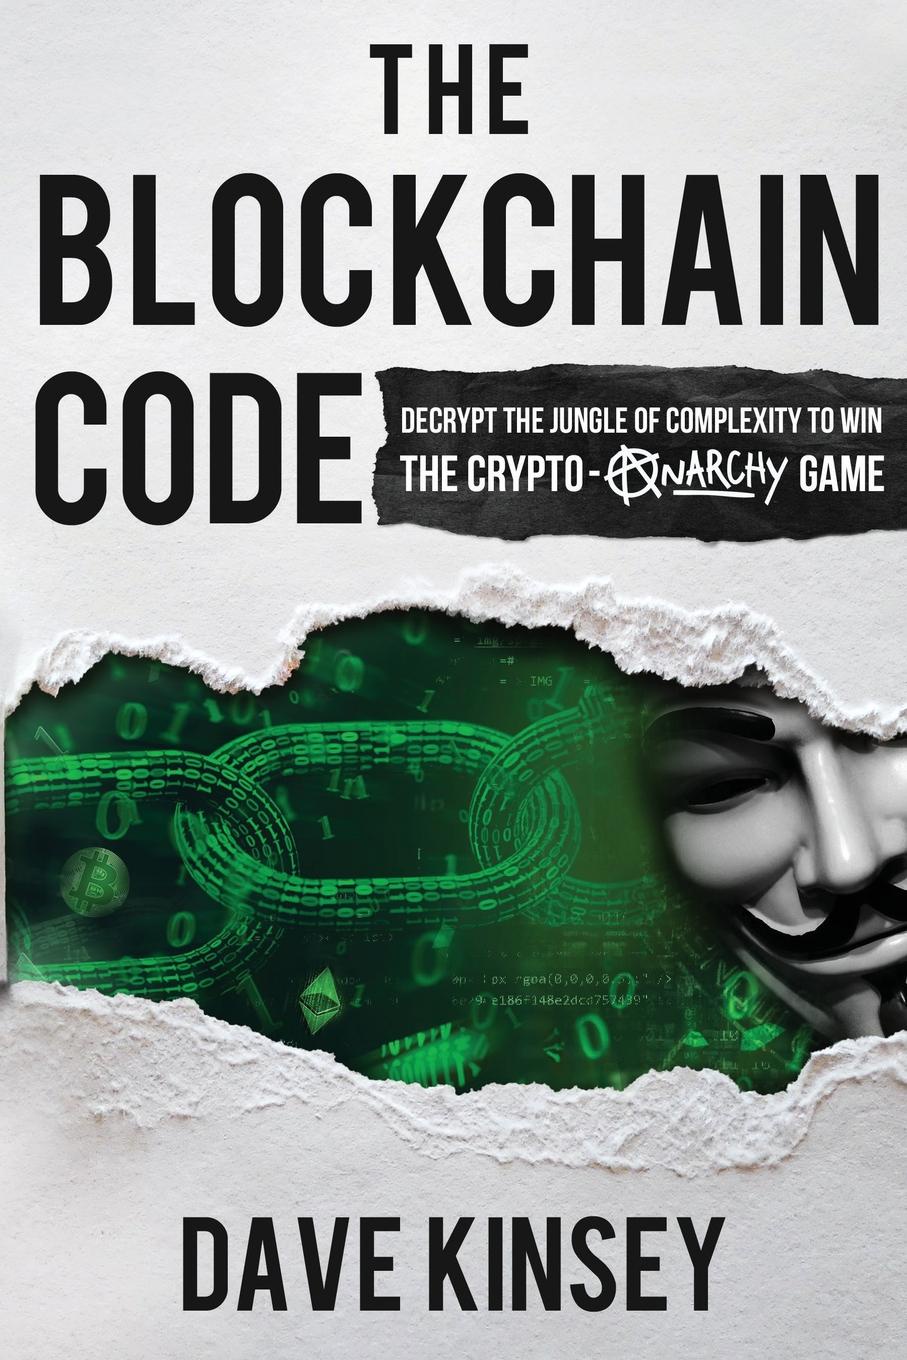 The Blockchain Code. Decrypt the Jungle of Complexity to Win the Crypto-Anarchy Game